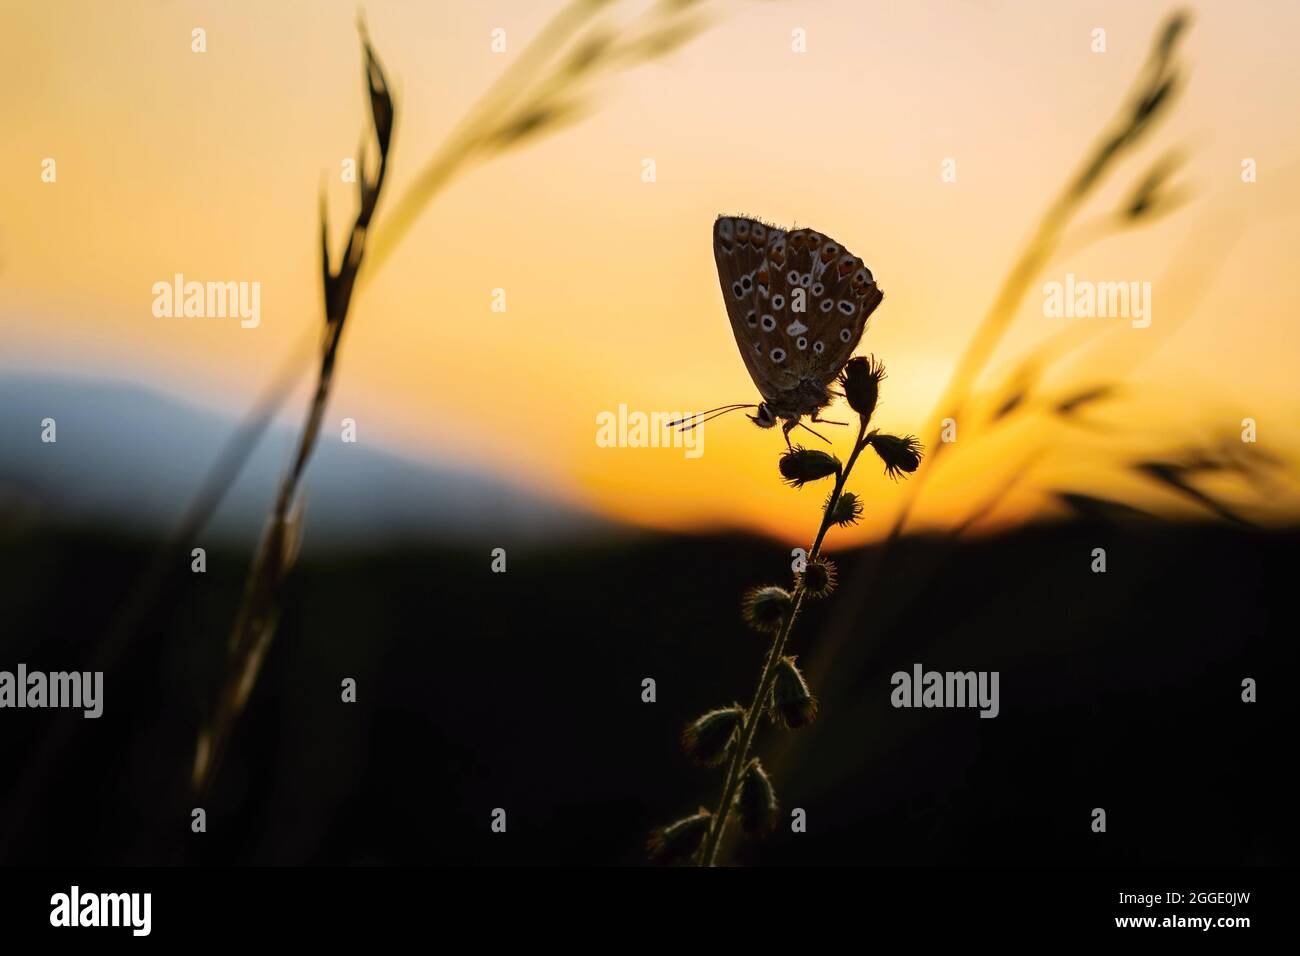 A silhouette of a female chalk hill blue butterfly sleeping on a plant. Orange and yellow sunset sky in the background. Summer evening in nature. Stock Photo